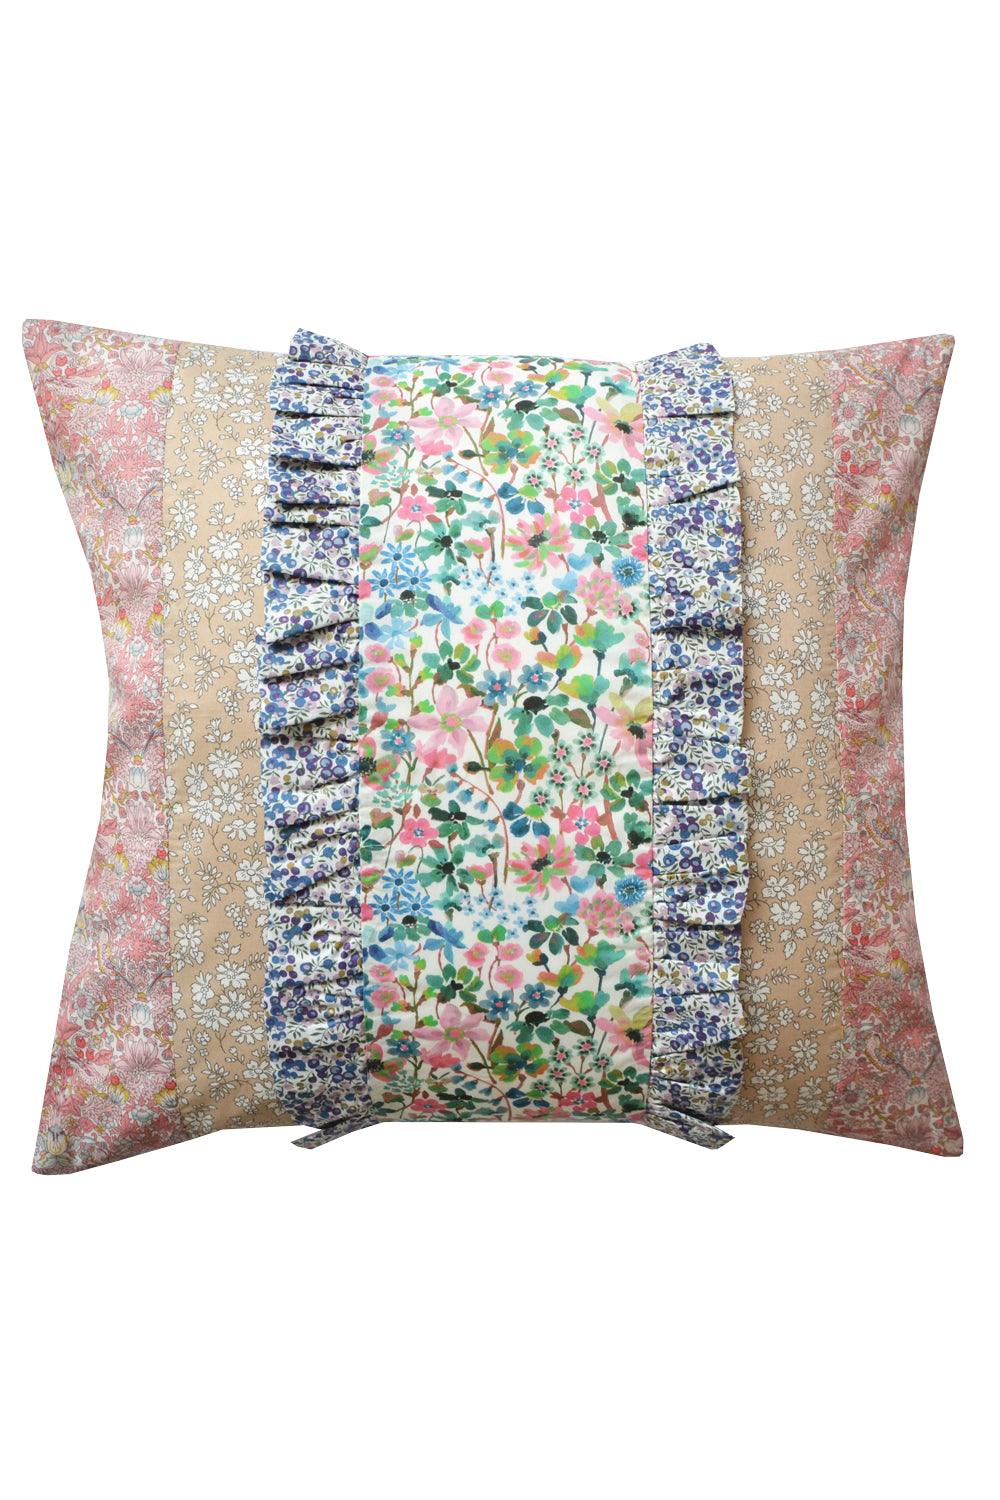 Patchwork Cushion made with Liberty Fabric DREAMS OF SUMMER - Coco & Wolf